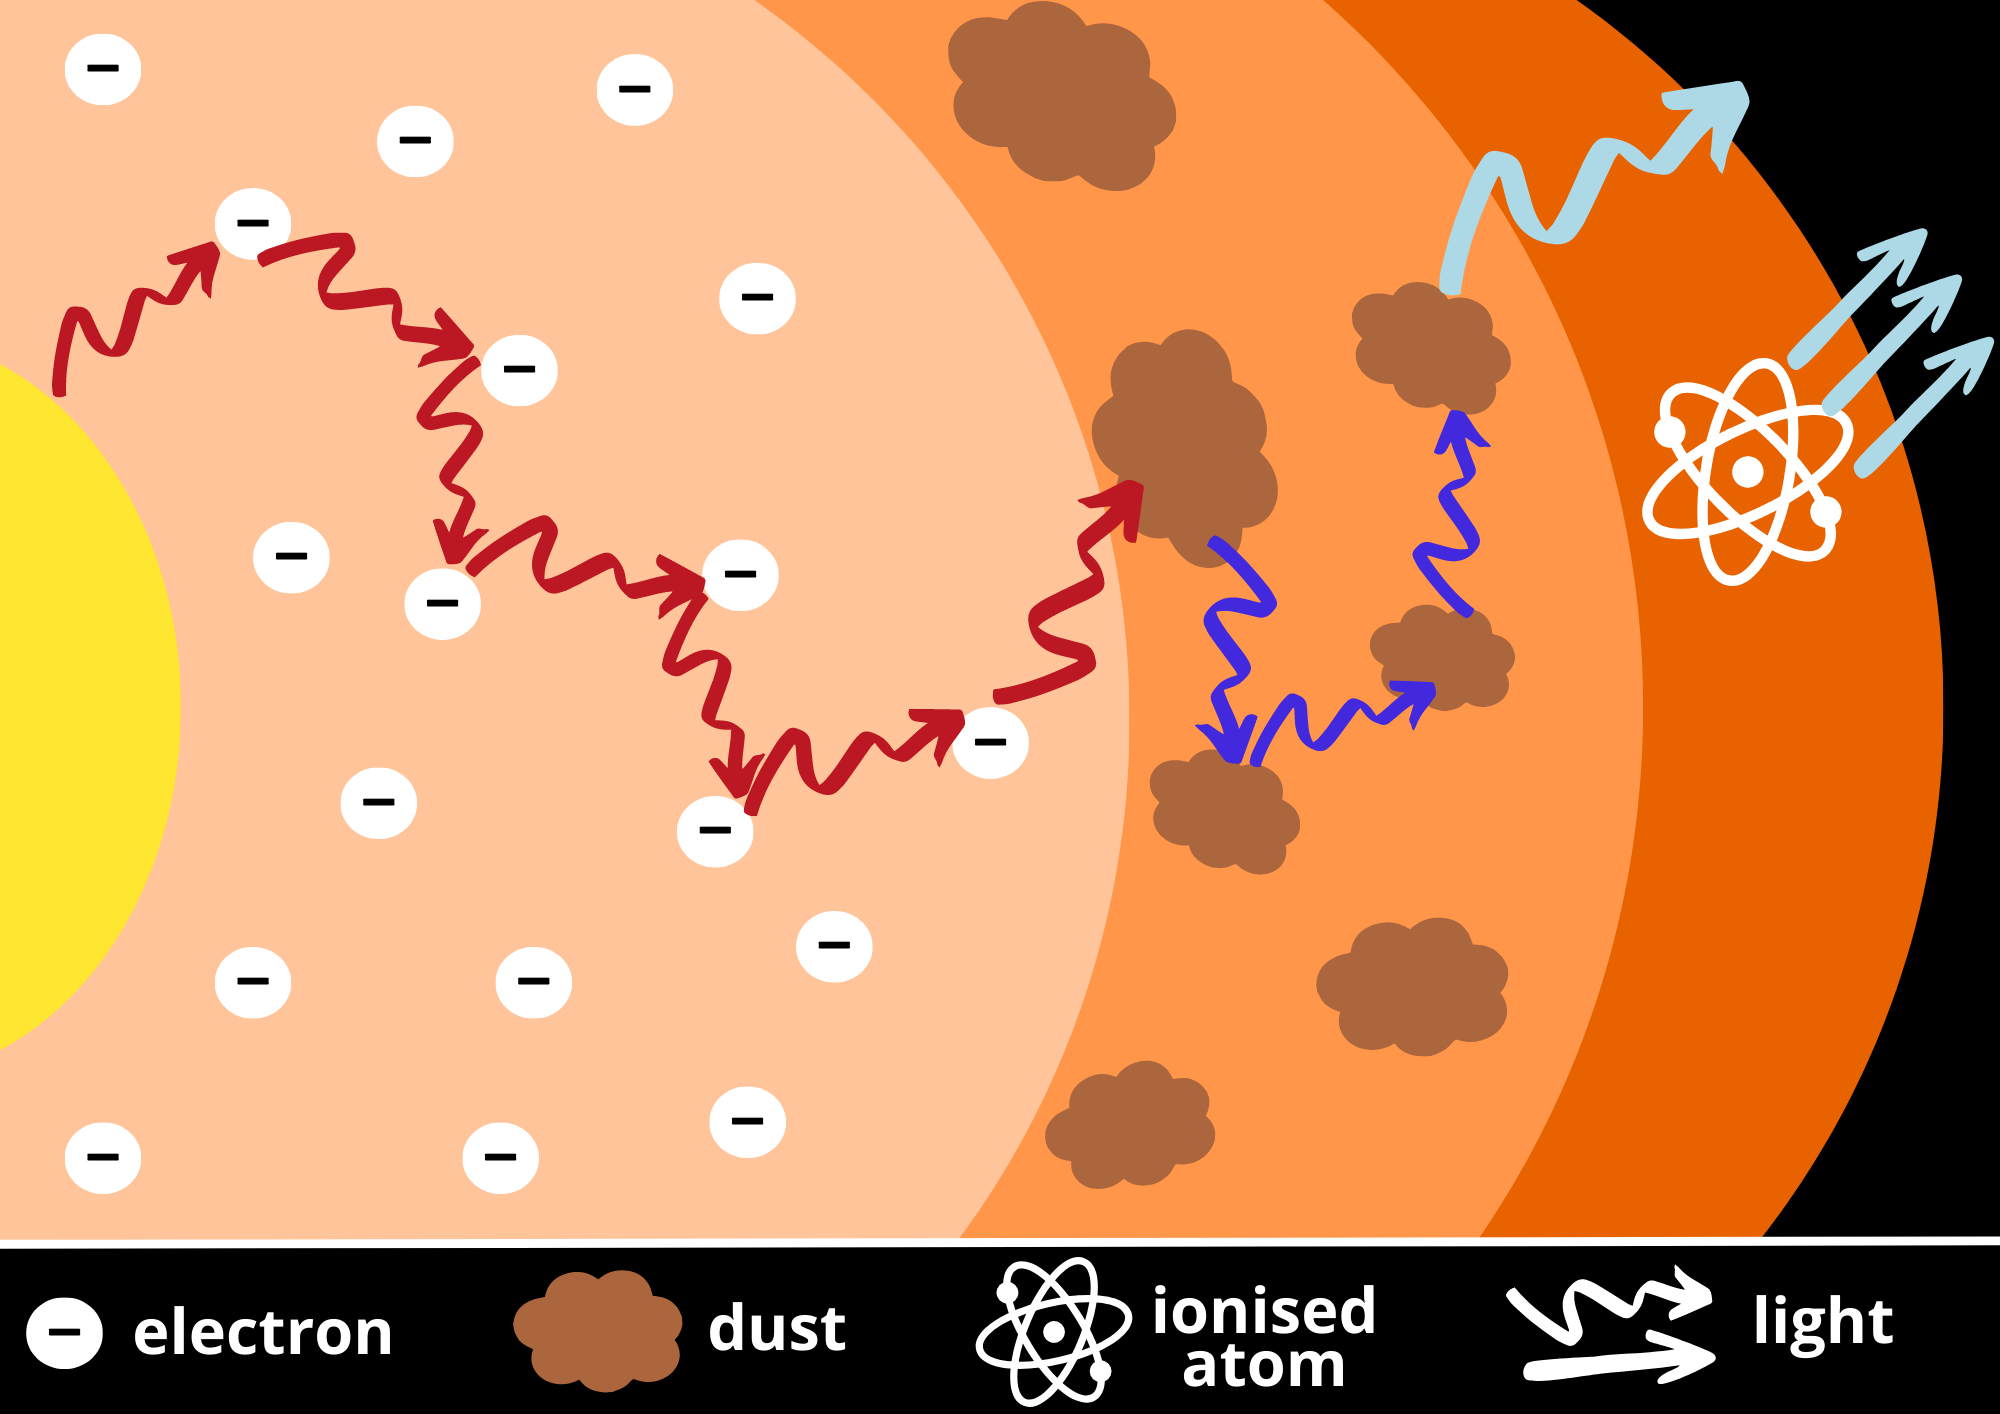 The image is split into three main curved sections, each a different shape of orange. At the bottom on a black background is a key for the diagram. This consists of various shapes and text, which are described as follows. White circles with black lines in the centre represent ‘electrons’. Brown cloud-like shapes represent ‘dust’. White ovals overlapping at different angles, but centred on a small white circle, represents an ‘ionised atom’. Wiggly and straight arrows represent ‘light’. The first section of the diagram has many of the white circles randomly spread out. Red wiggly arrows point between these circles in the general direction of left to right, until one touches a brown cloud. In the second section, blue wiggly arrows point between the brown clouds. In the third and final curved section a wiggly light blue arrow points into the black background. There are also overlapping ovals centred on the small circle in this section, with straight light blue arrows also pointing into the background.